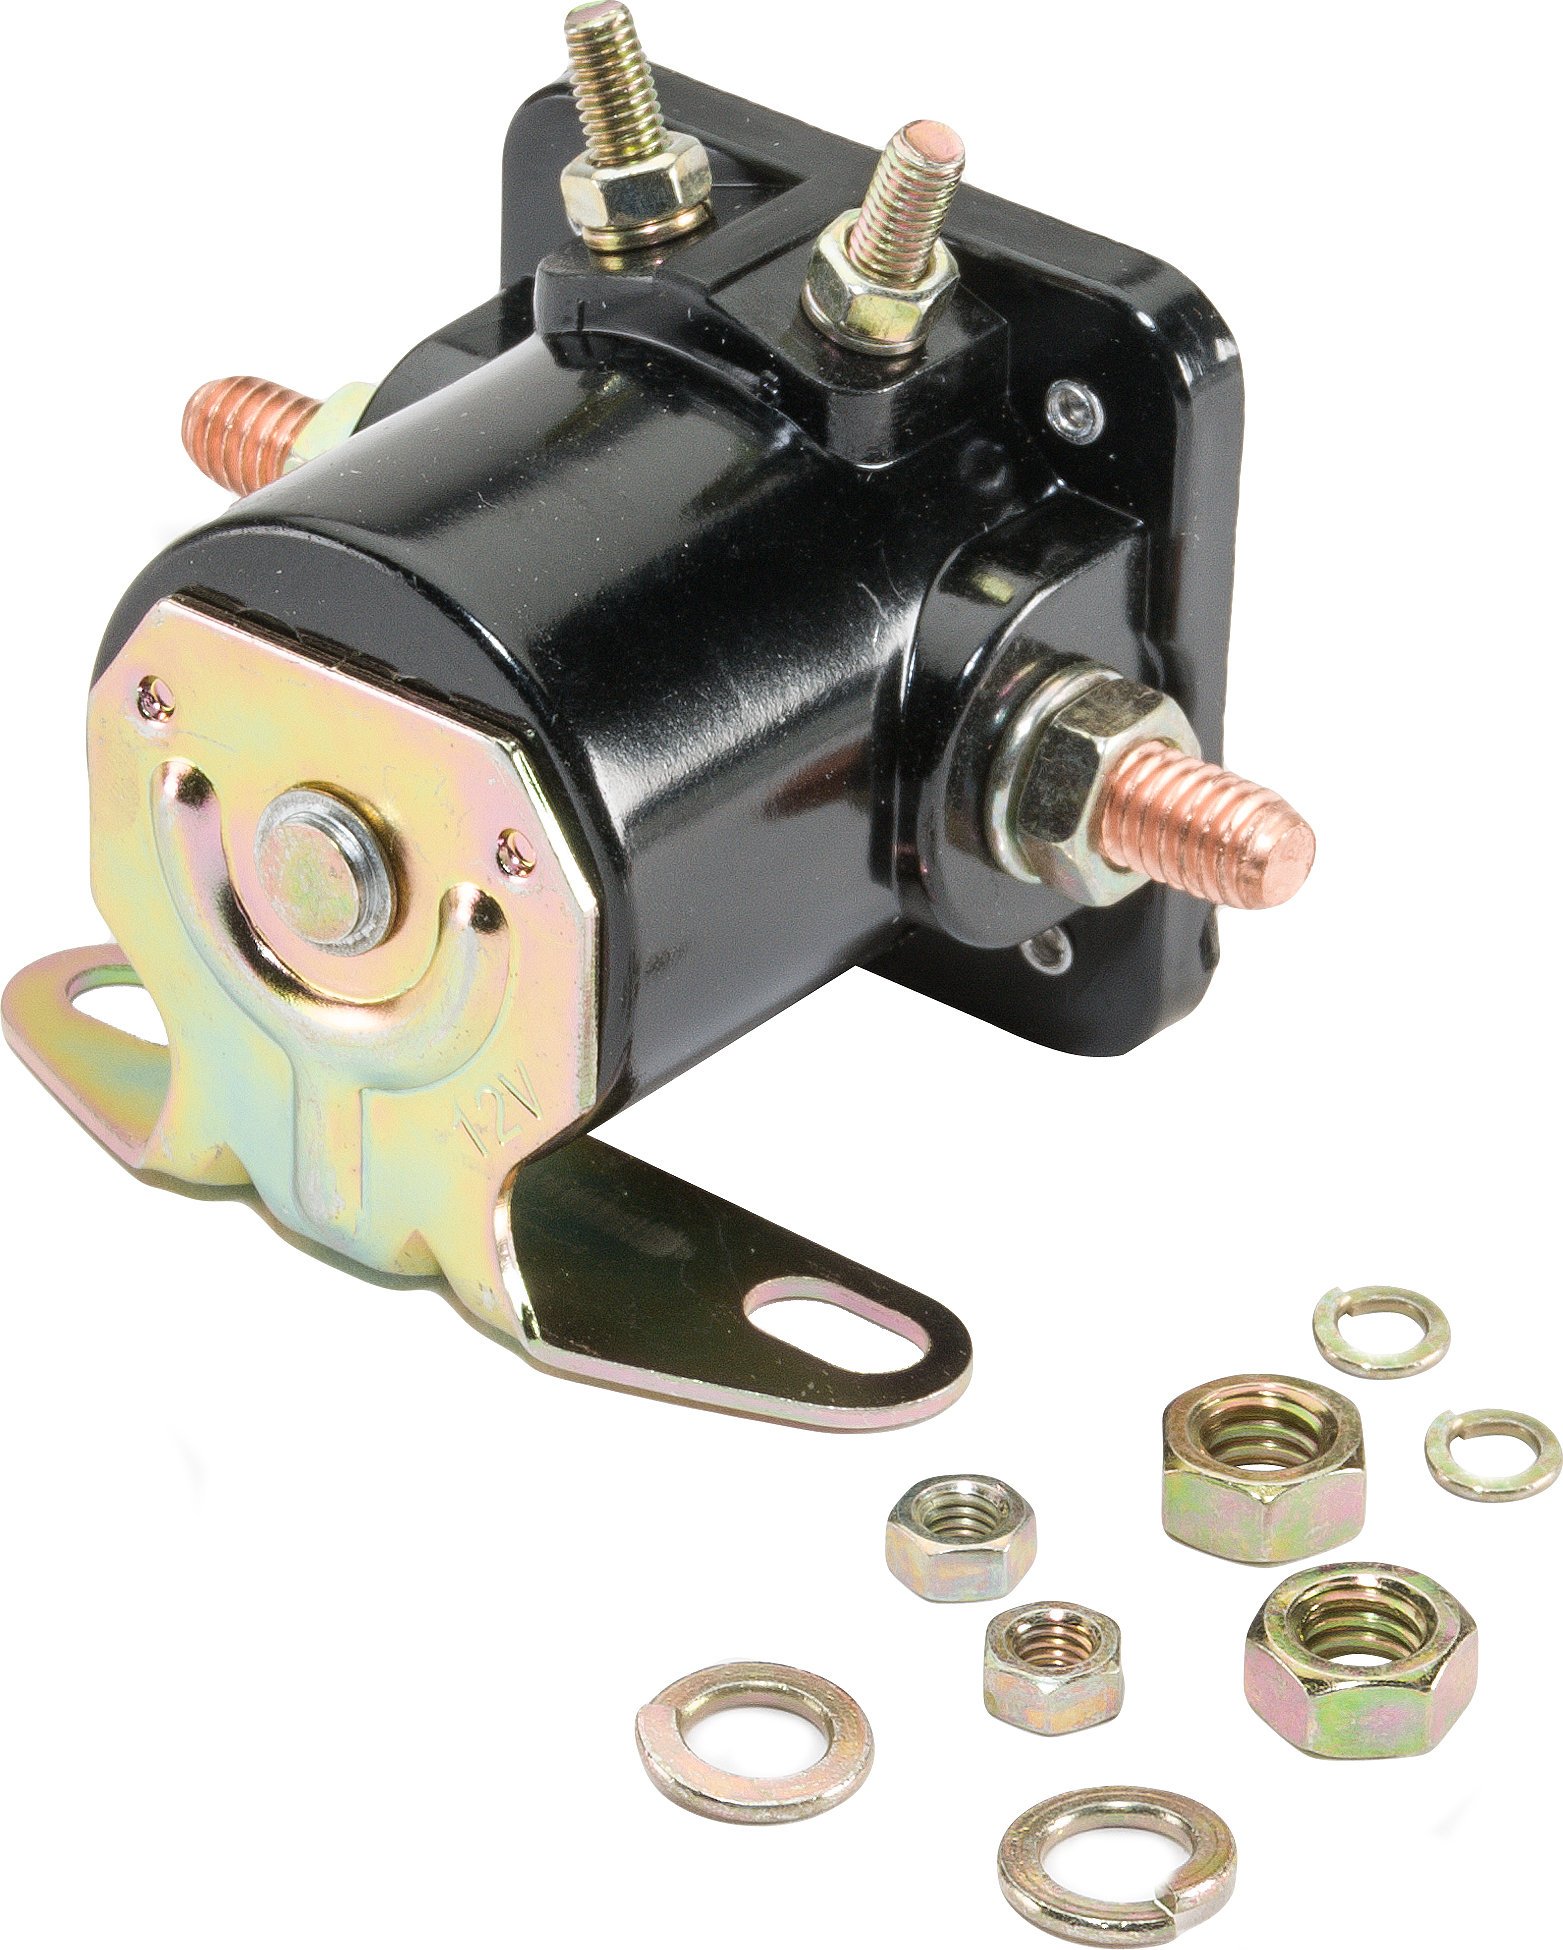 OMIX  Starter Solenoid for 72-79 Jeep CJ Series & 72-79 Cherokee  with AMC  4 Cylinder Engine, 72-79 CJ Series with ,  or   Engines | Quadratec